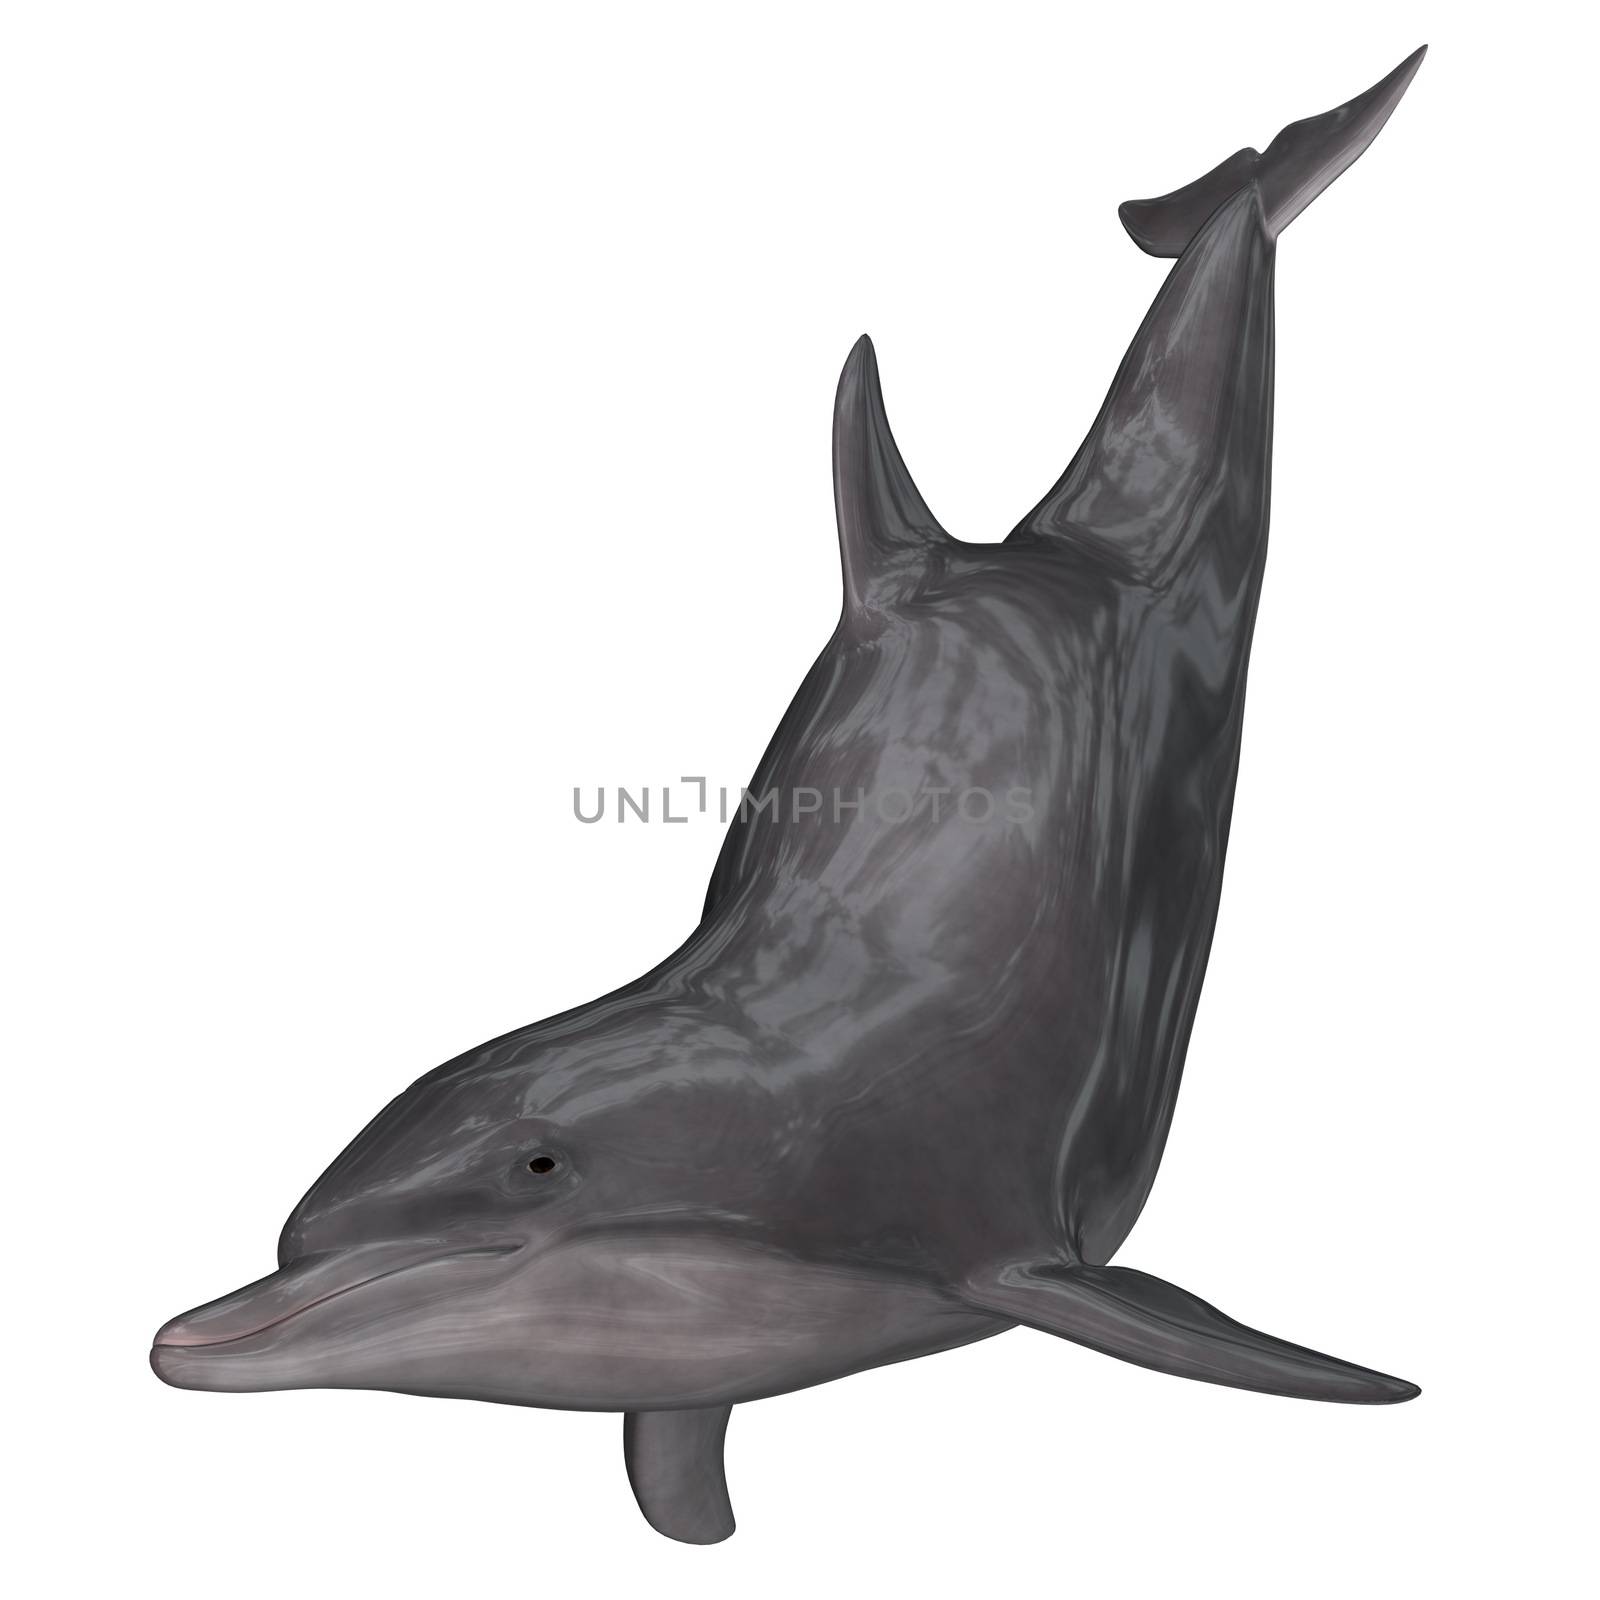 Dolphin isolated in white background - 3D render